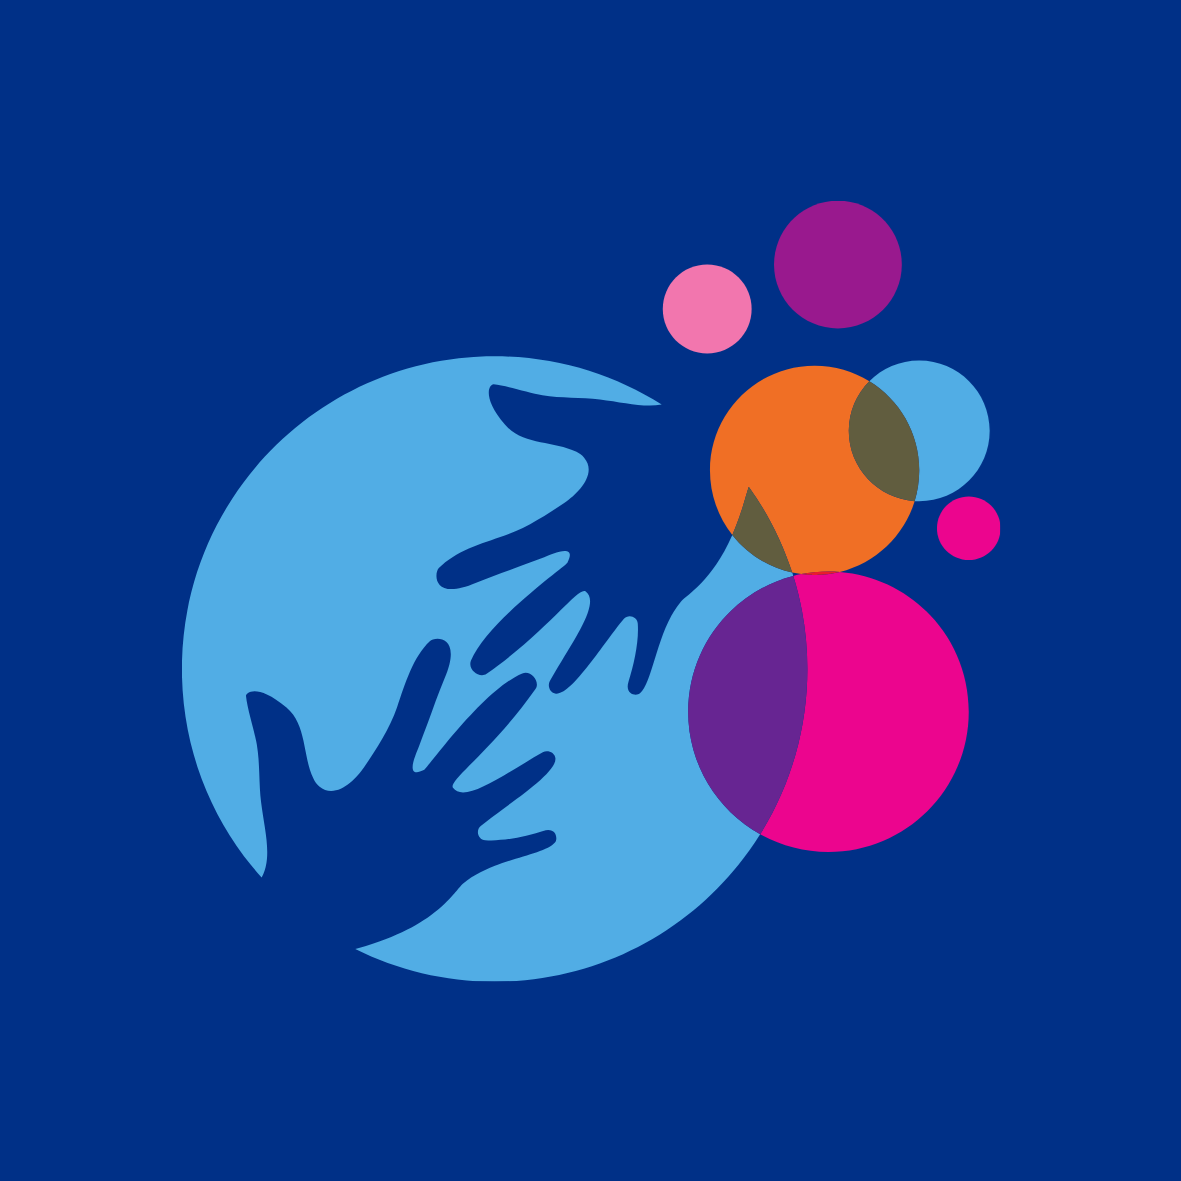 Graphic of Hands Touching in Blue Circle With Smaller Coloured Balls